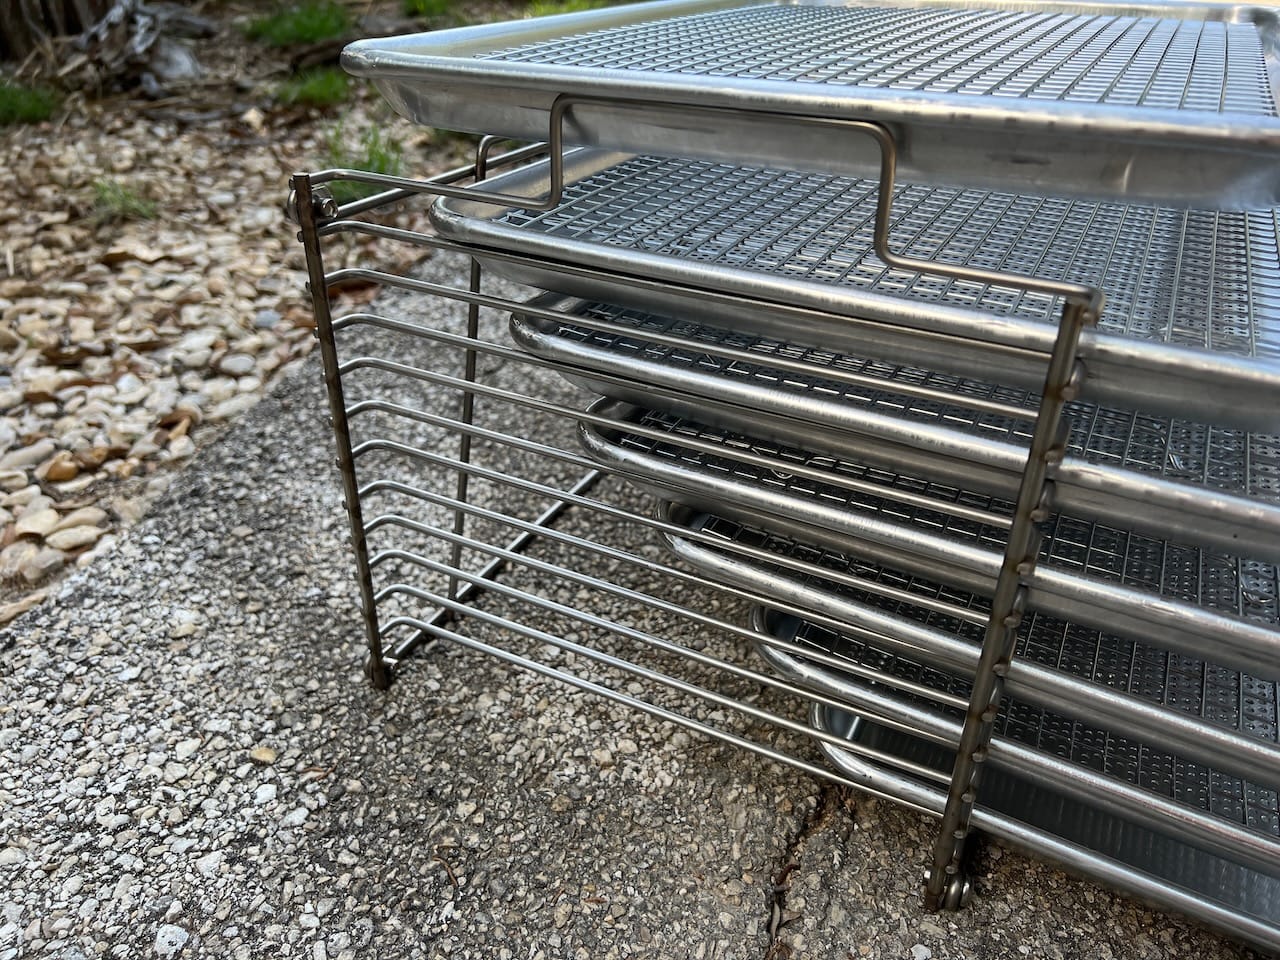 BR6 rack system to hold the individual trays.